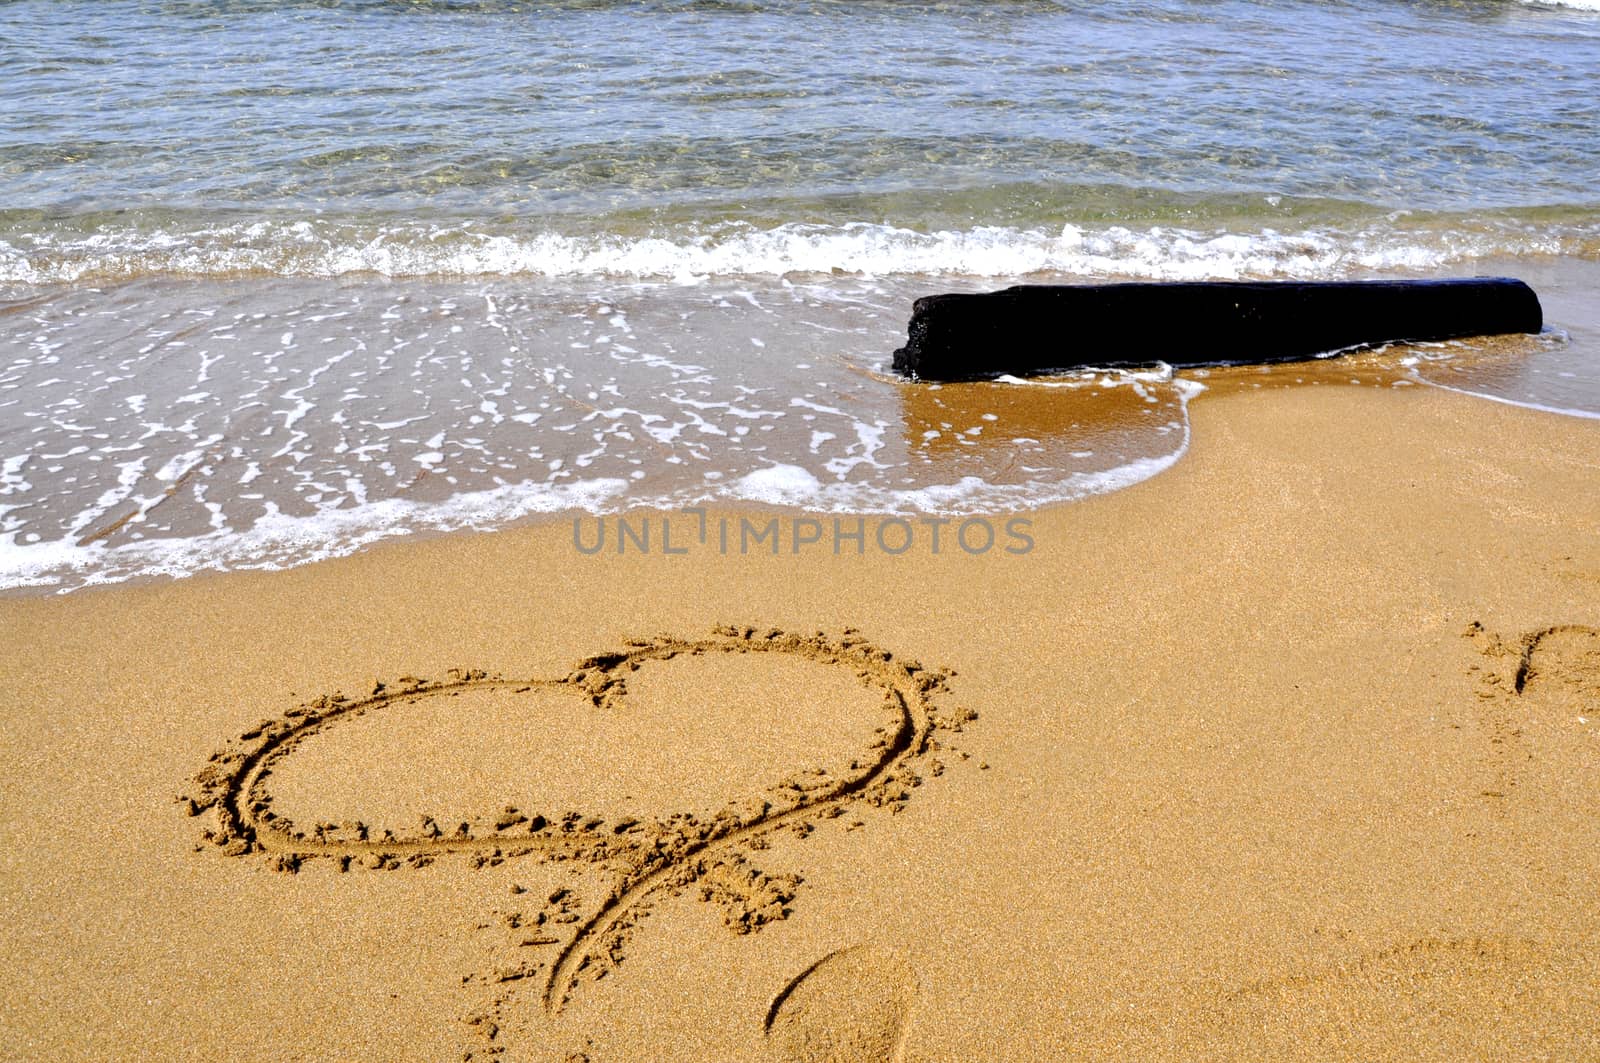 Hand drawn picture of the heart on wet beach sand.